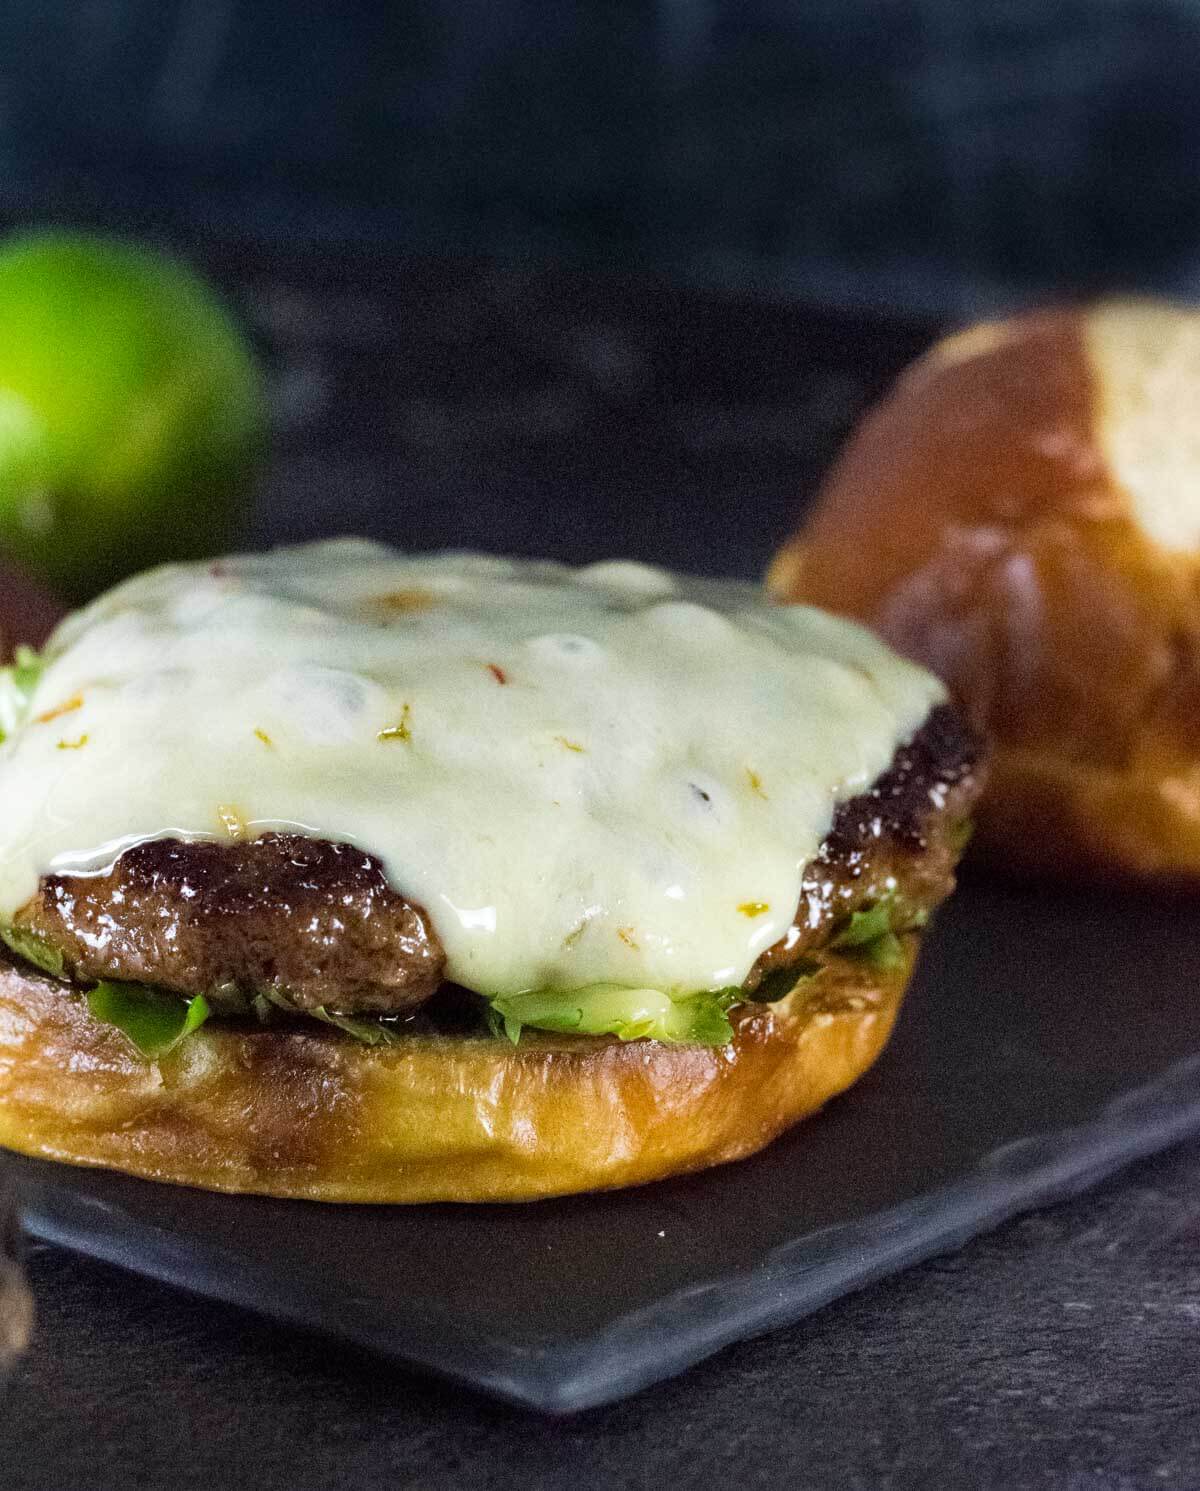 Mexican Burger with cheese and no top bun.